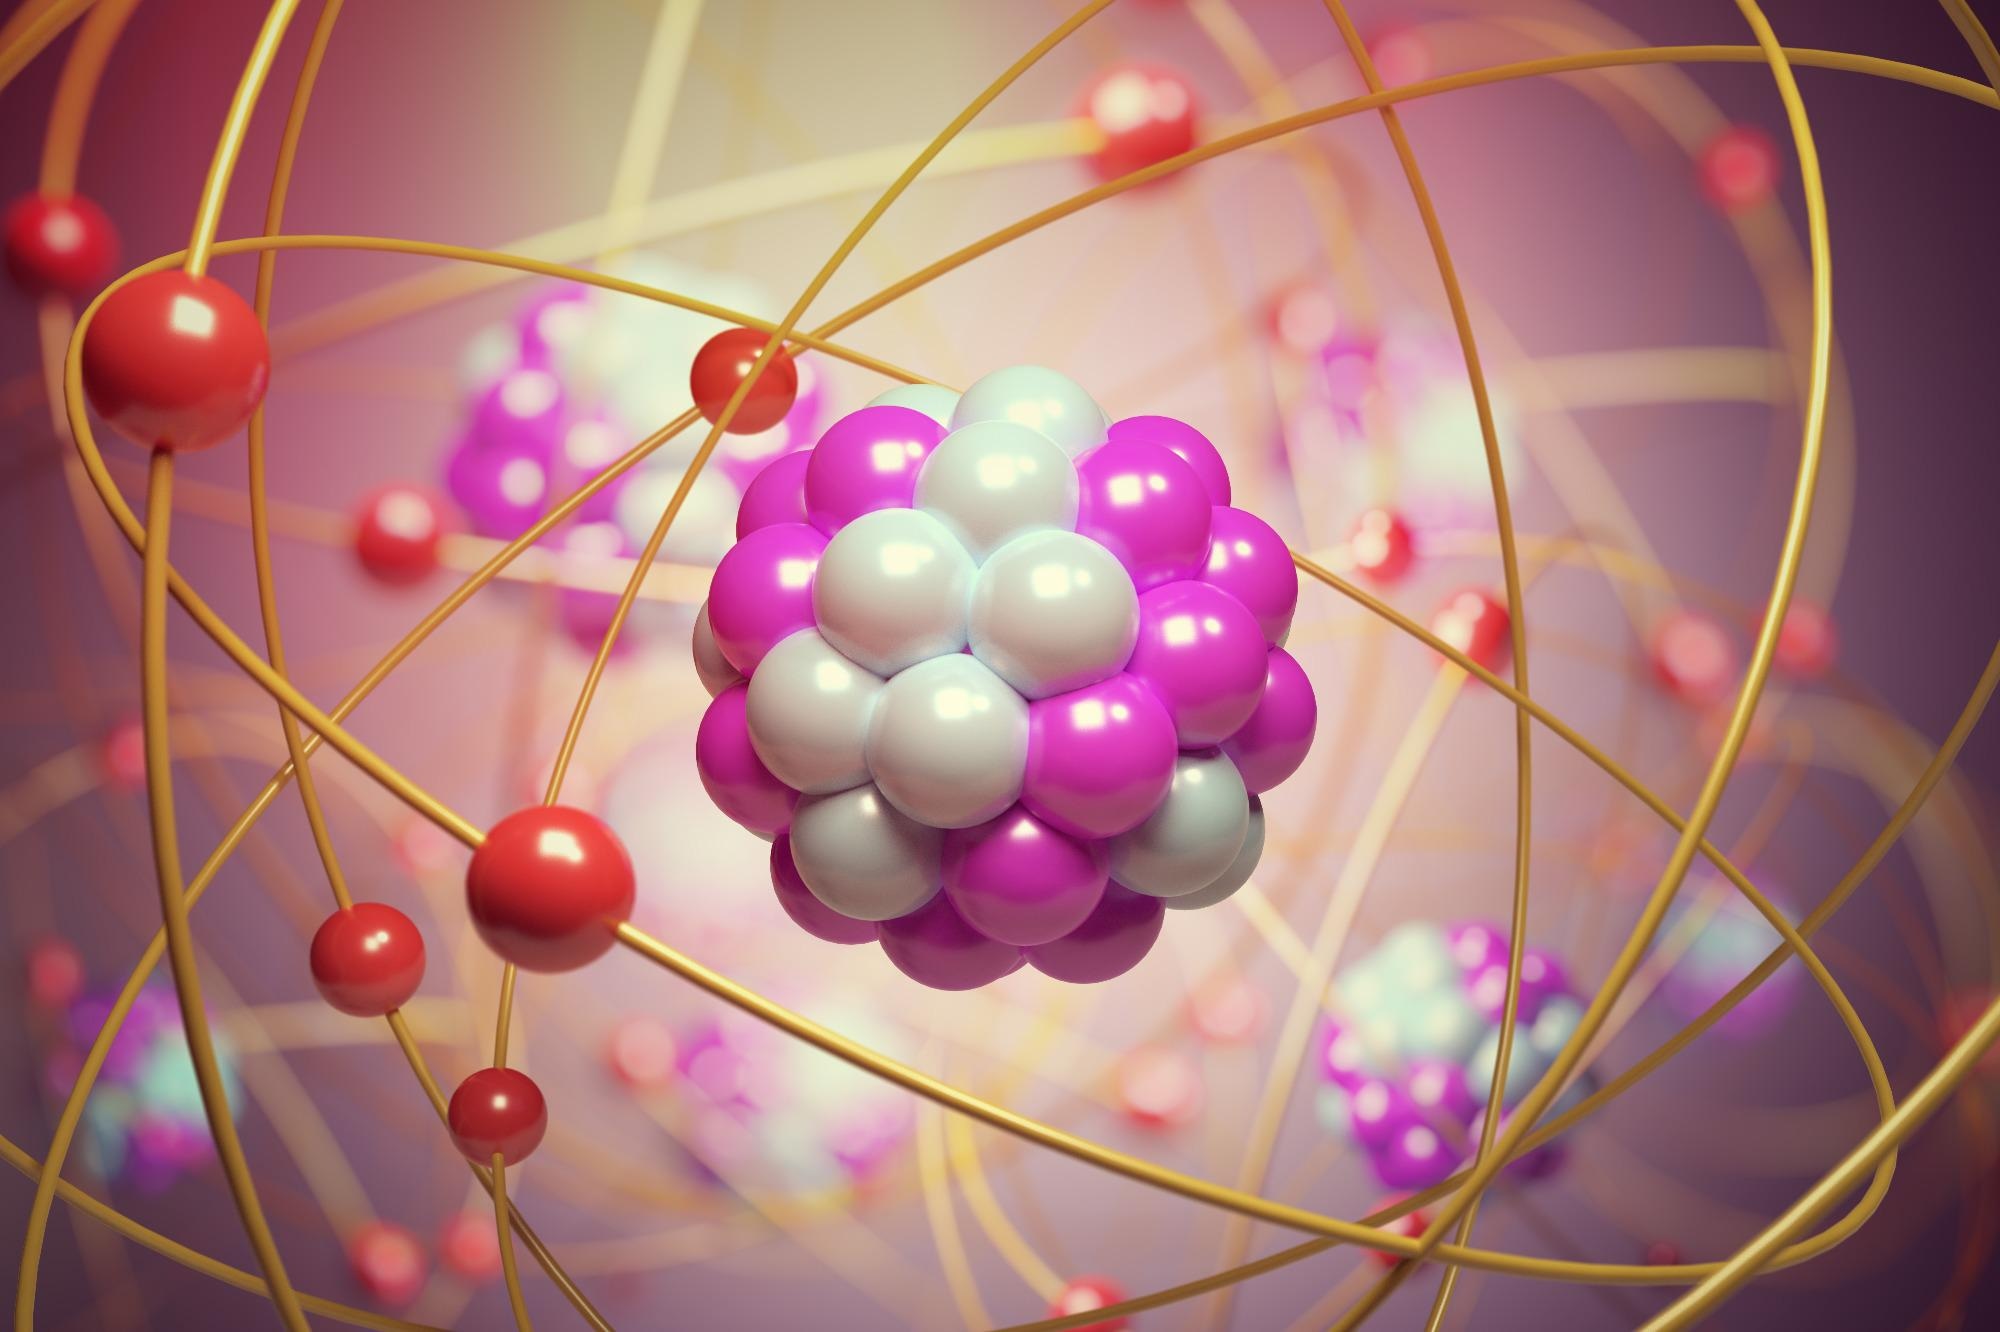 Researchers Image Details of Electron Dynamics in Atoms.